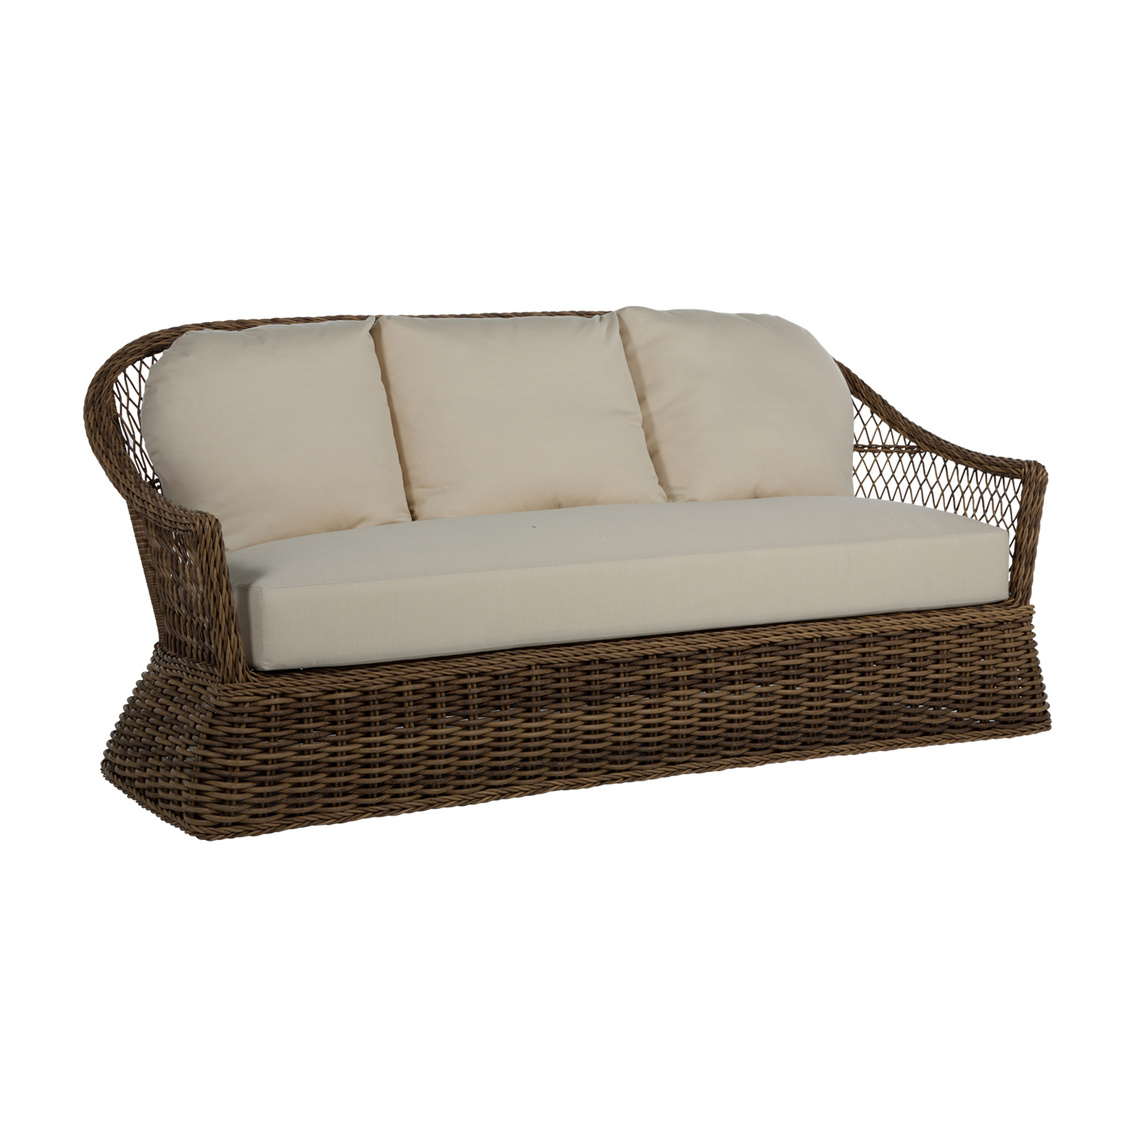 soho wicker sofa in raffia – frame only product image